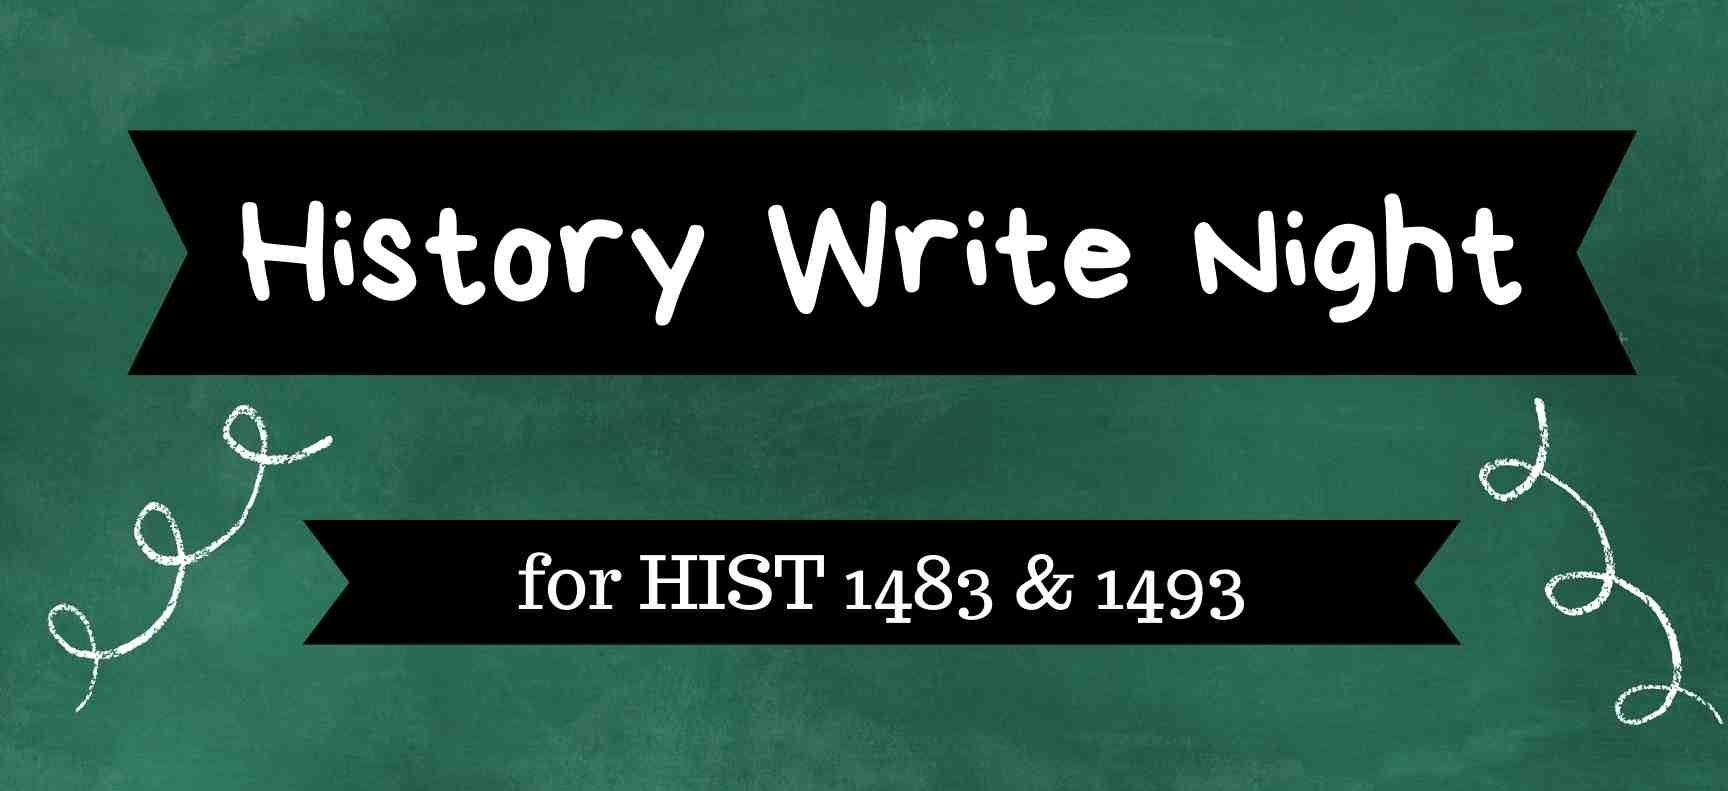 History Write Night for HIST 1483 and 1493